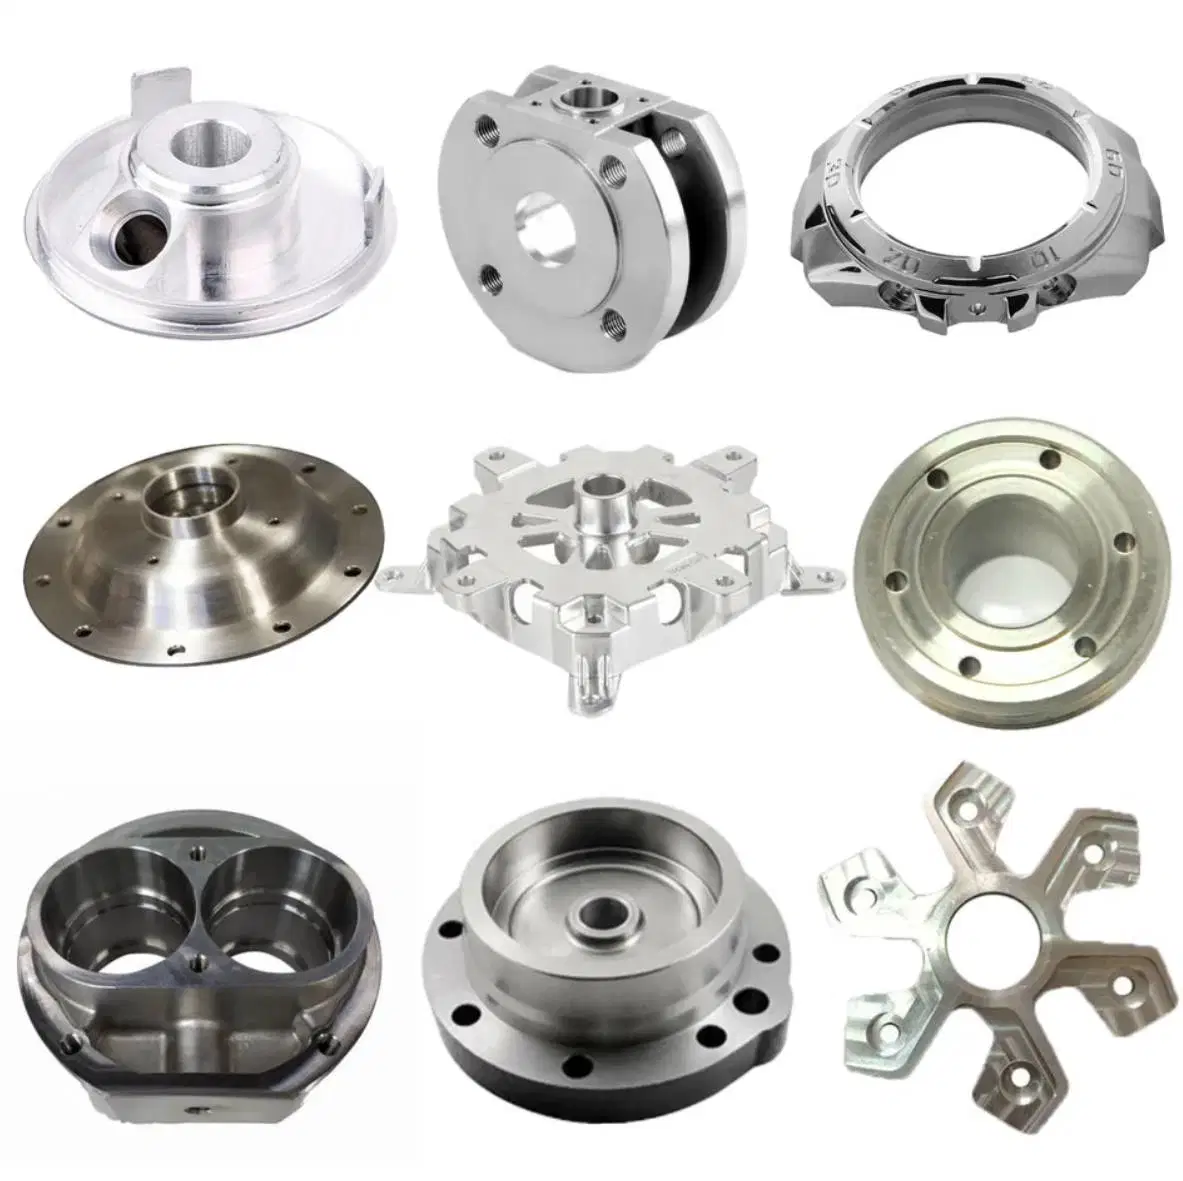 CNC Machining Auto Bicycle Motorcycle Machinery Transmission Equipment Ss Carbon Steel Components